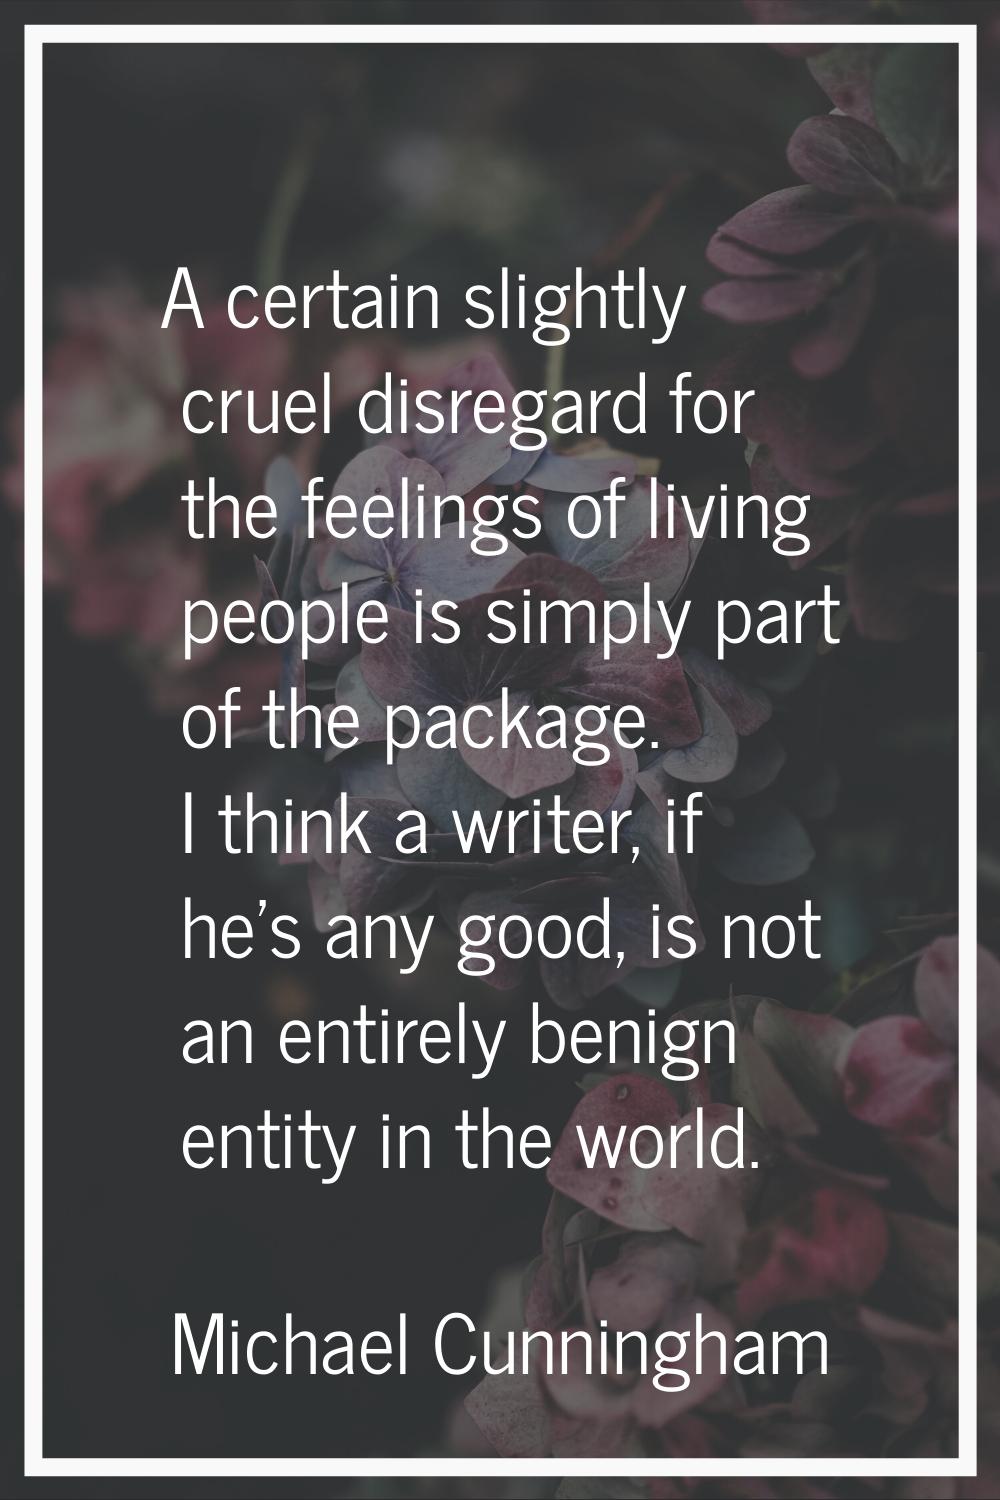 A certain slightly cruel disregard for the feelings of living people is simply part of the package.